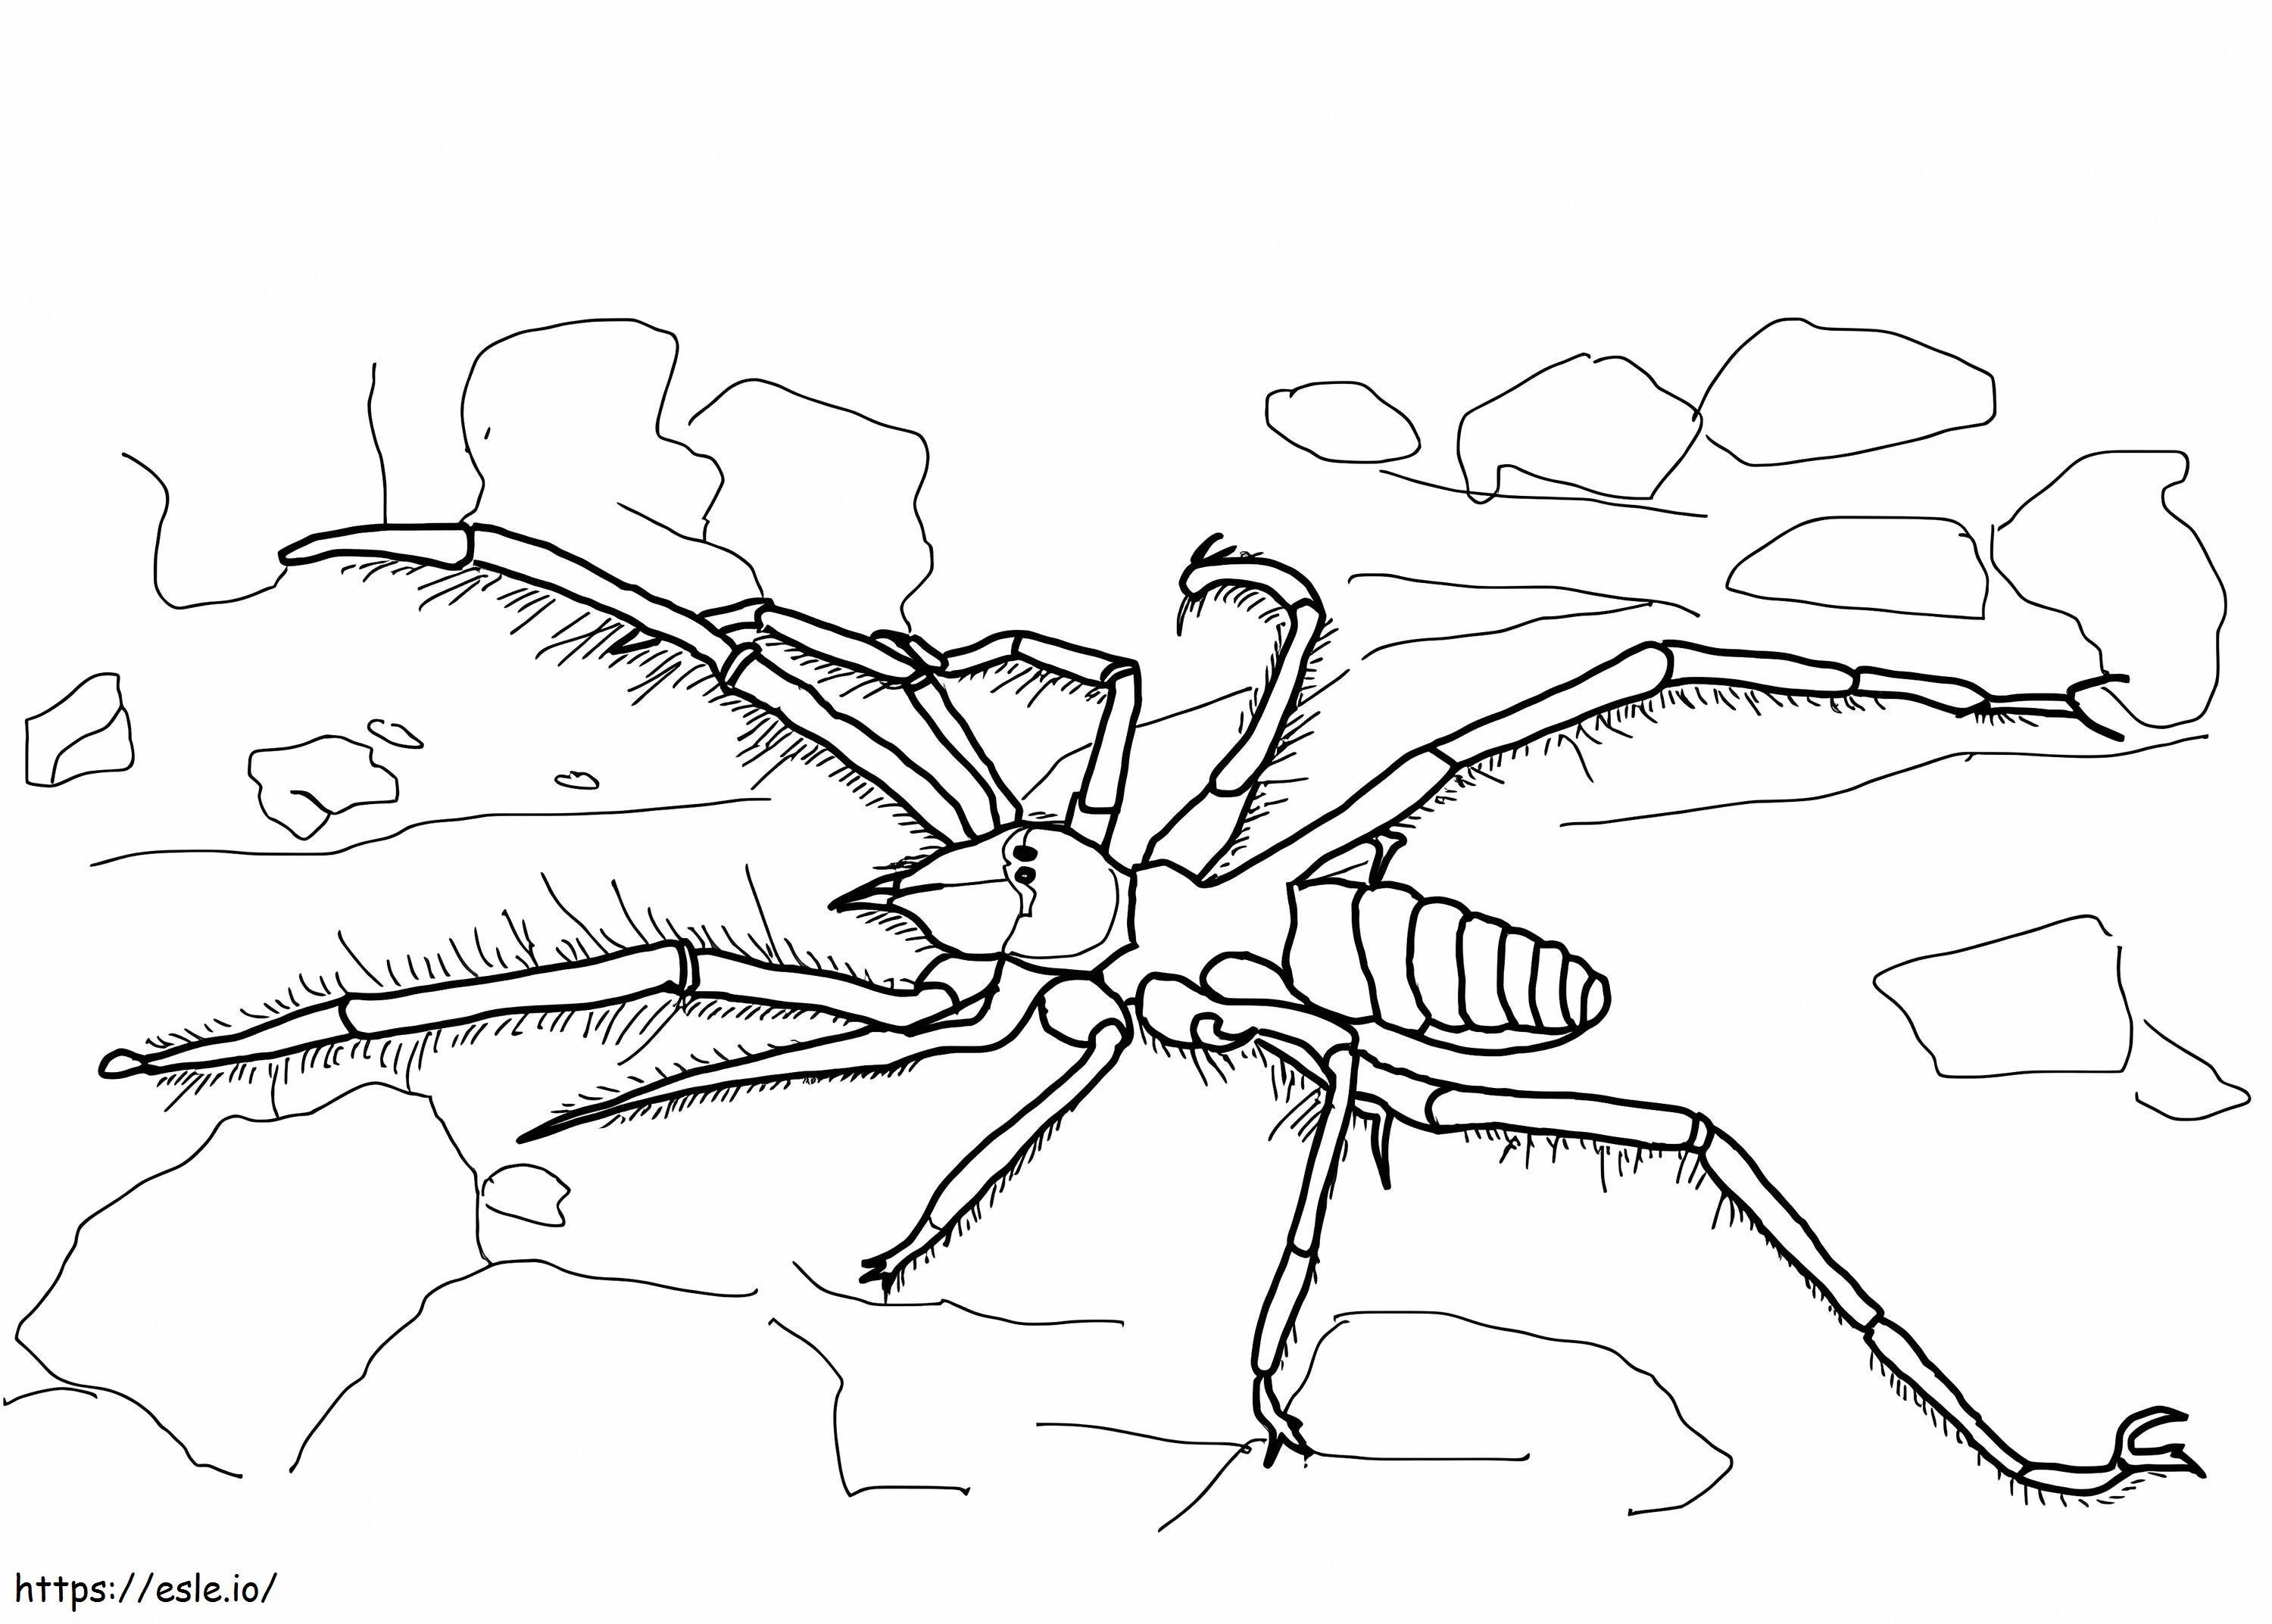 Camel Spider coloring page